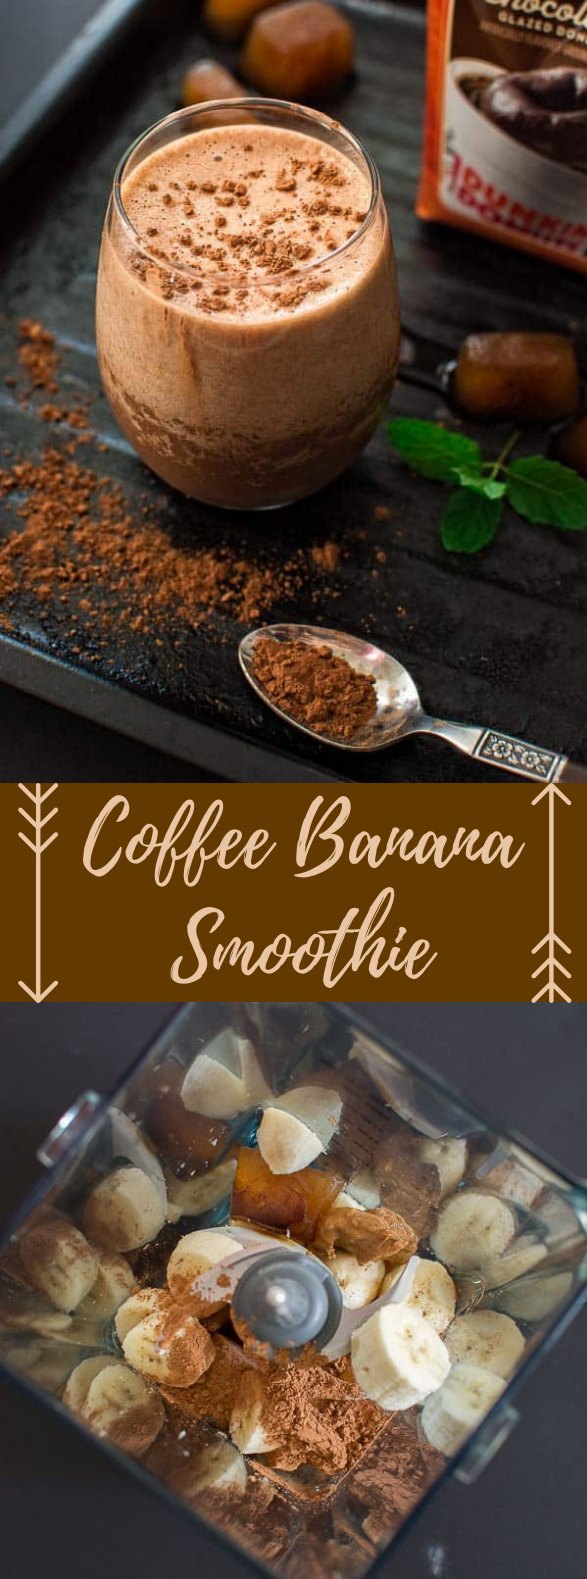 COFFEE BANANA SMOOTHIE #choffeedrink #smoothies